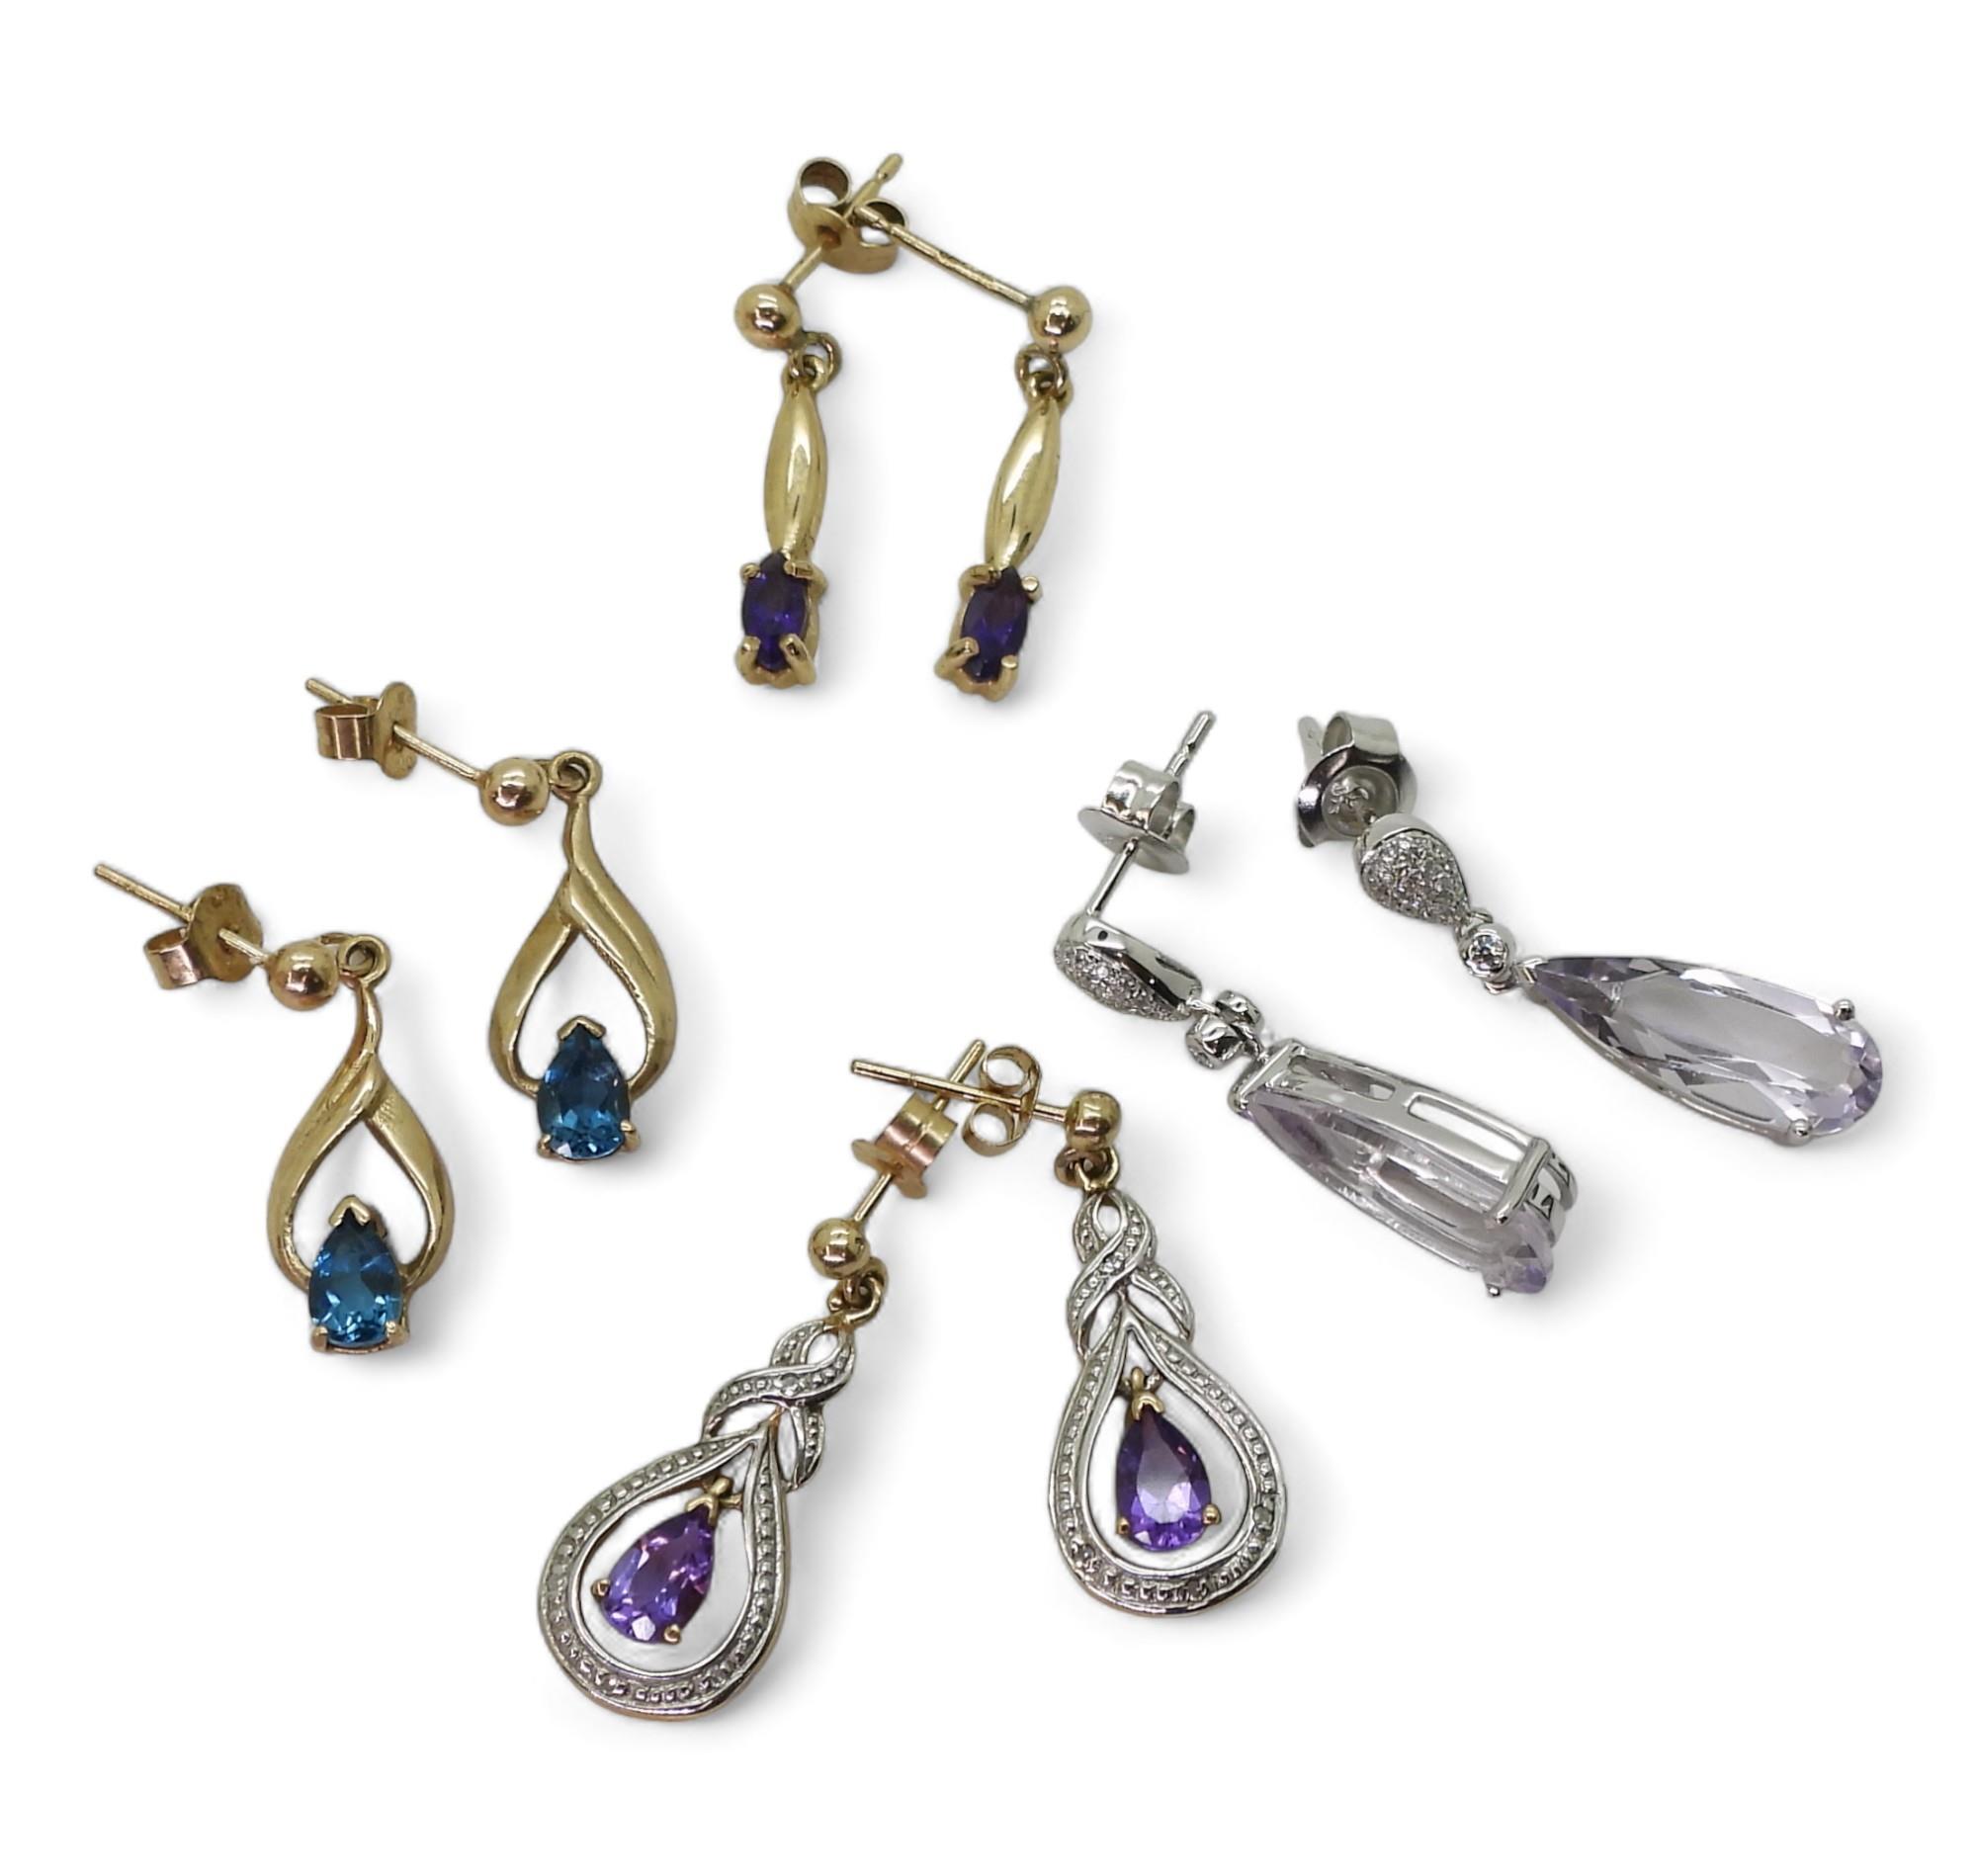 A pair of 9ct kunzite and diamond earrings, length 2.6cm, and a further three pairs of earrings